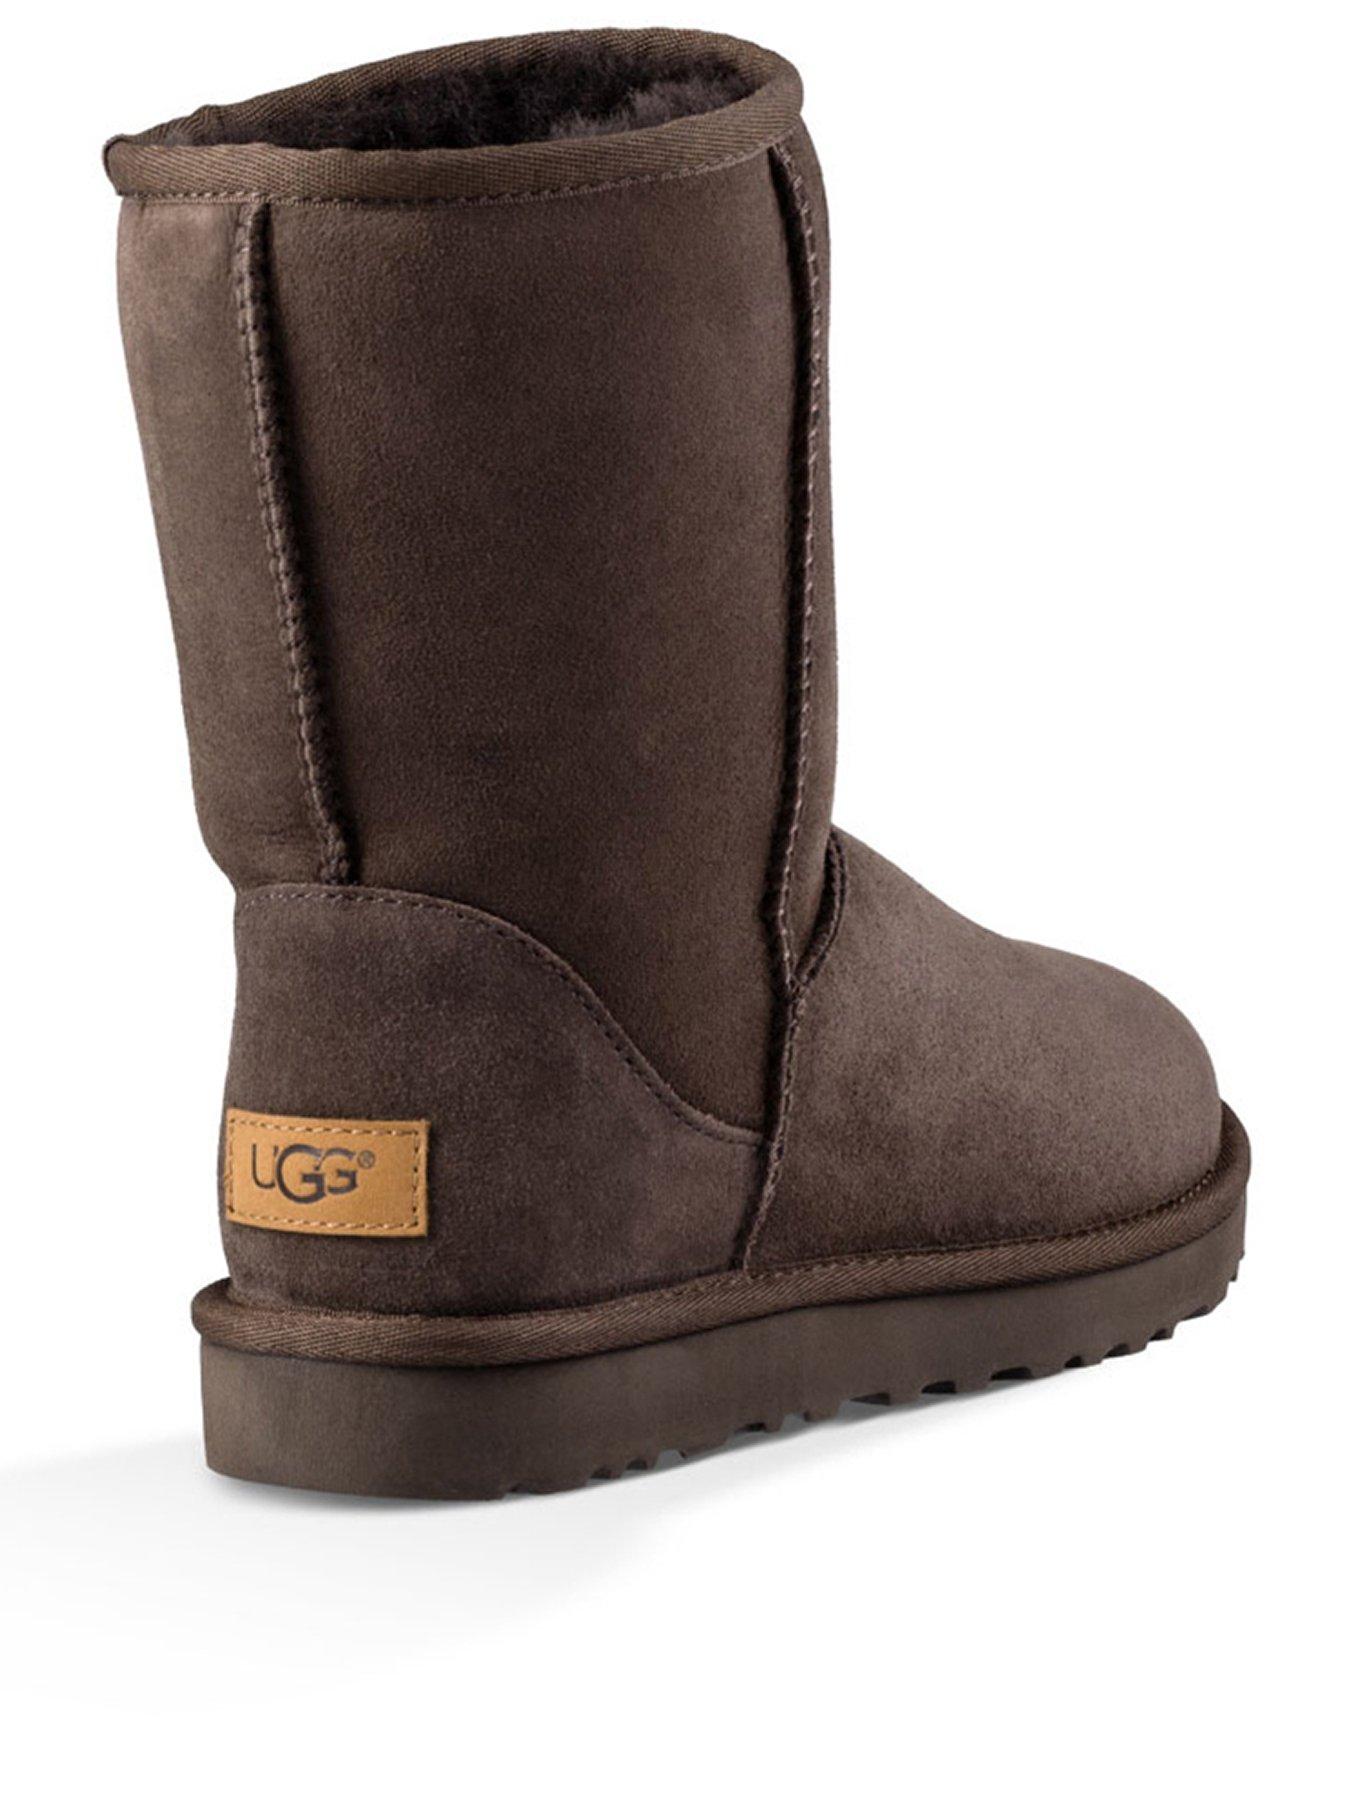 ugg classic short brown